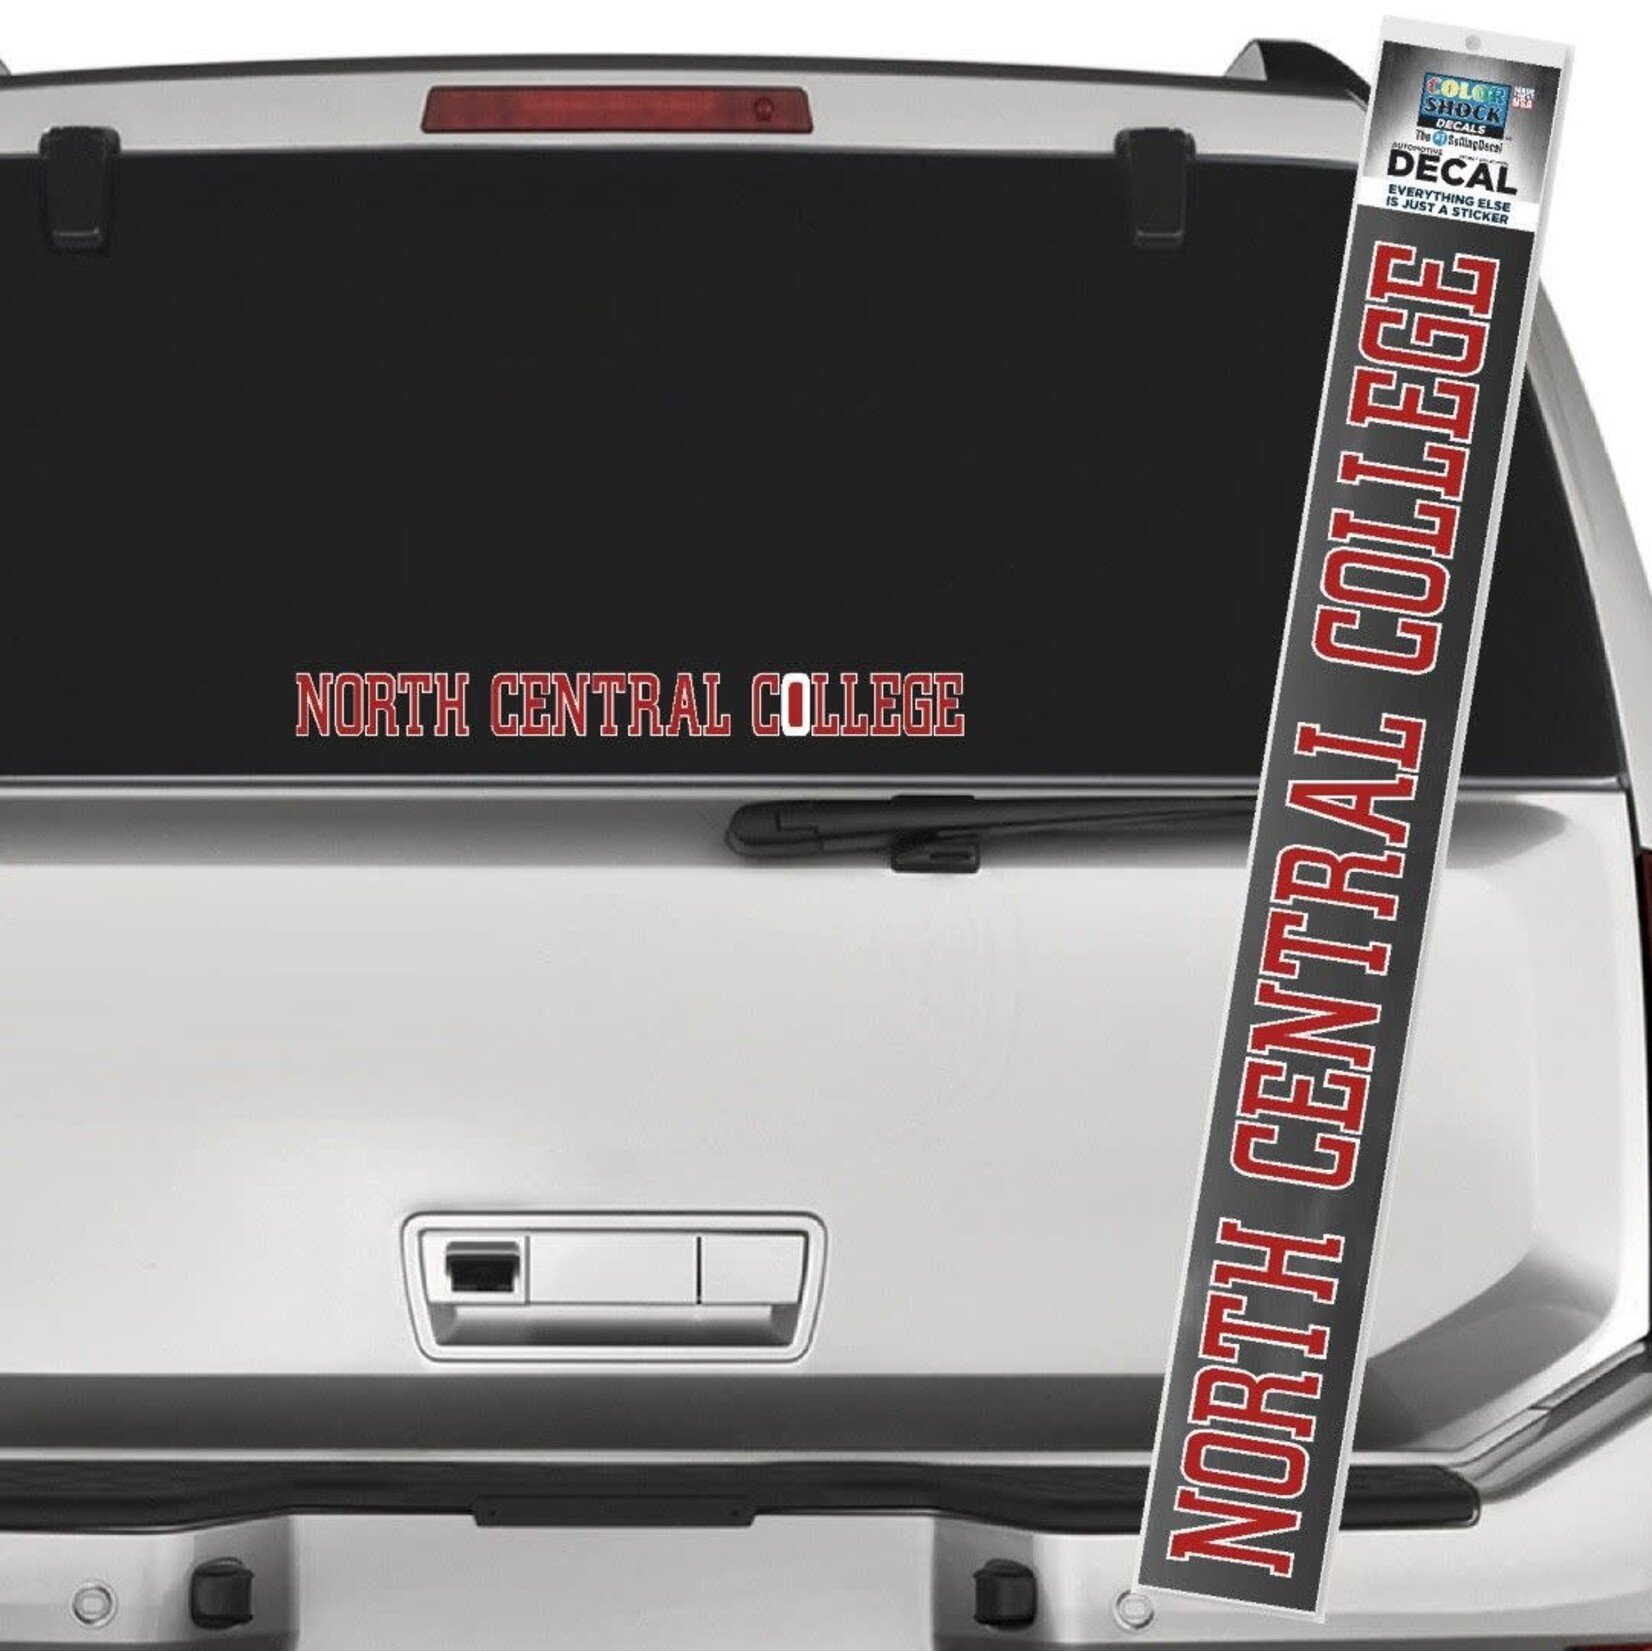 CDI Corporation North Central College Strip Decal by ColorShock